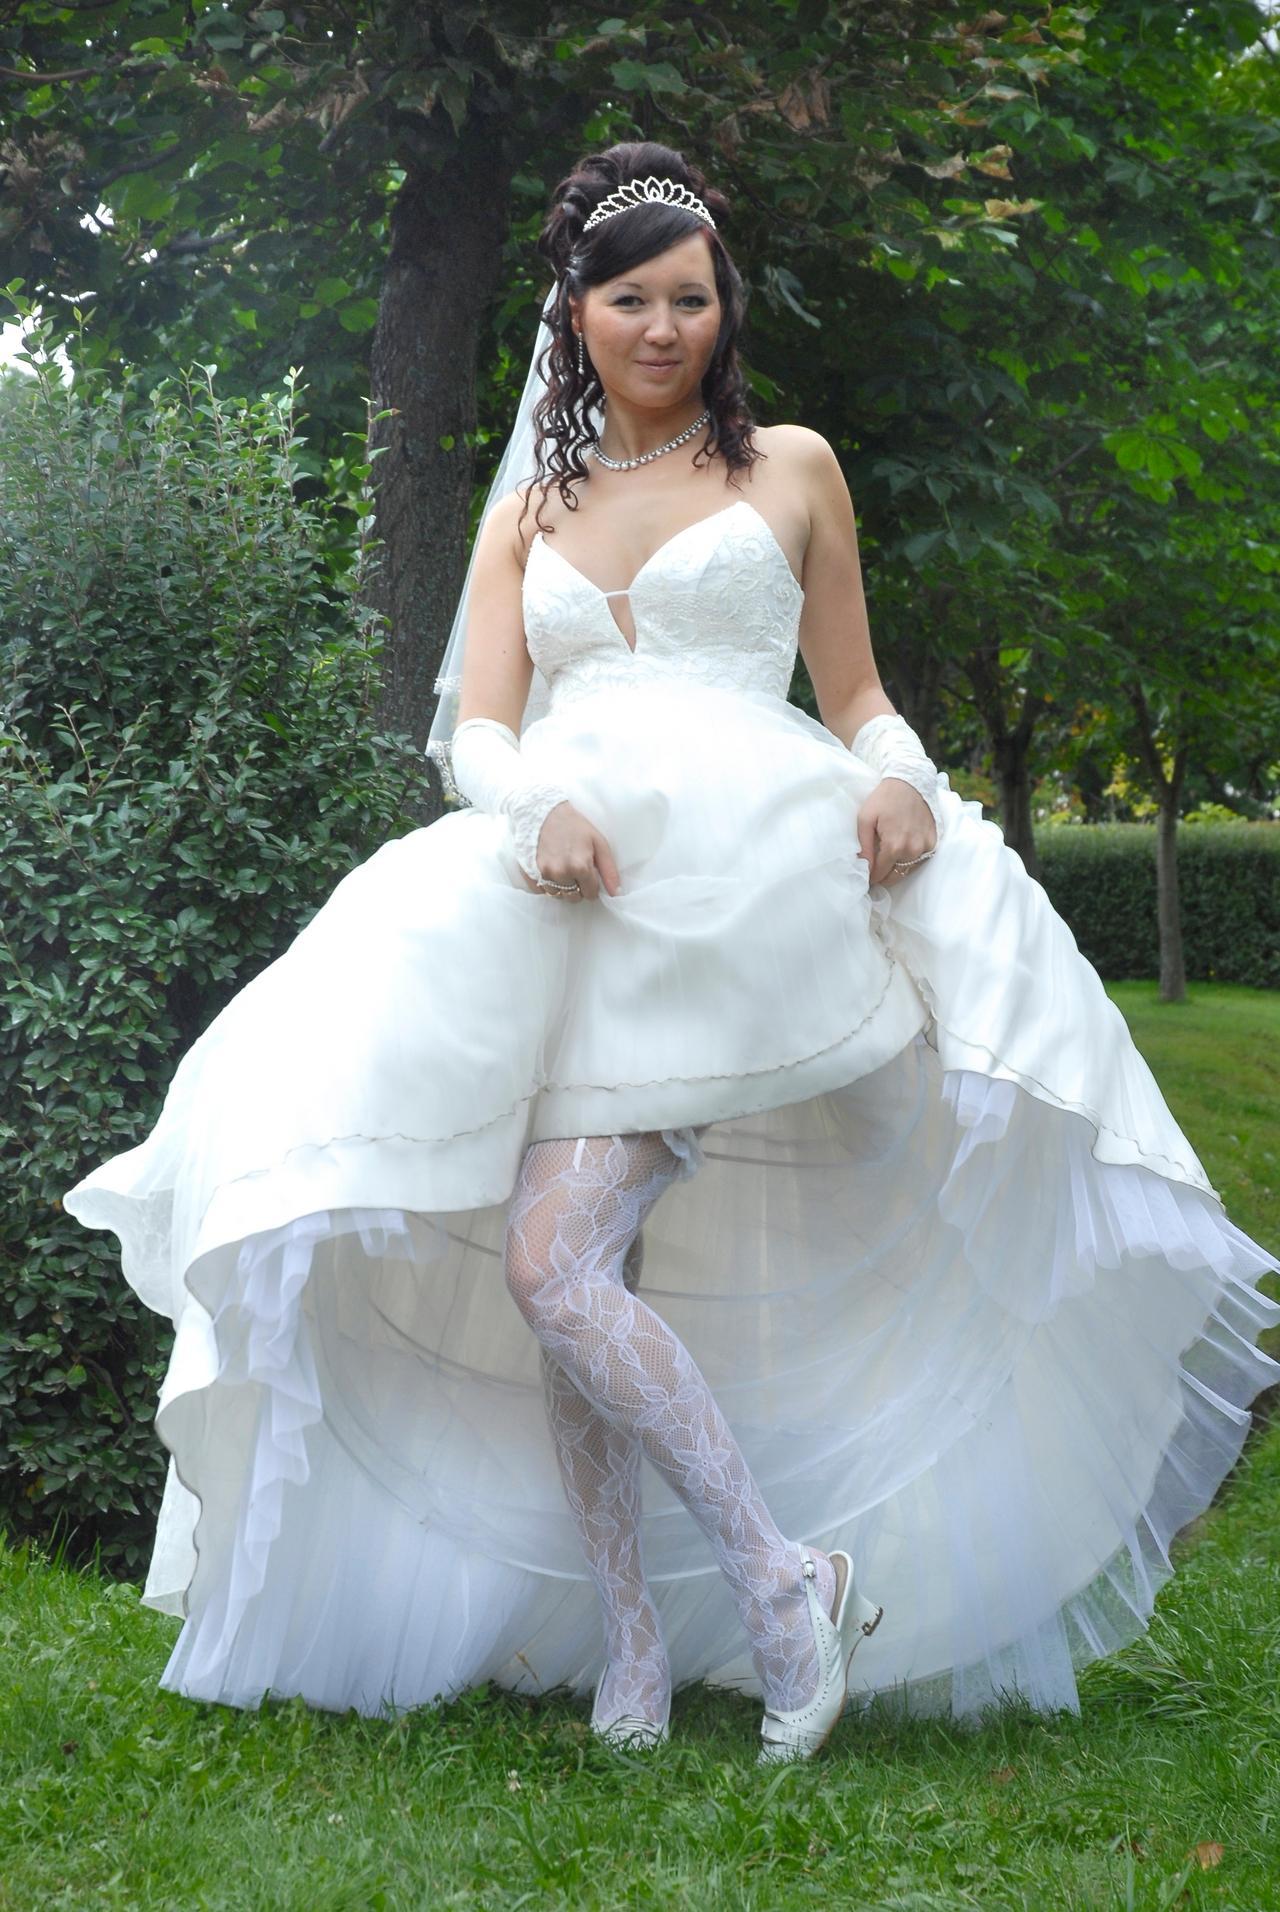 Real Free Gallery Of Amateur Brides Upskirt